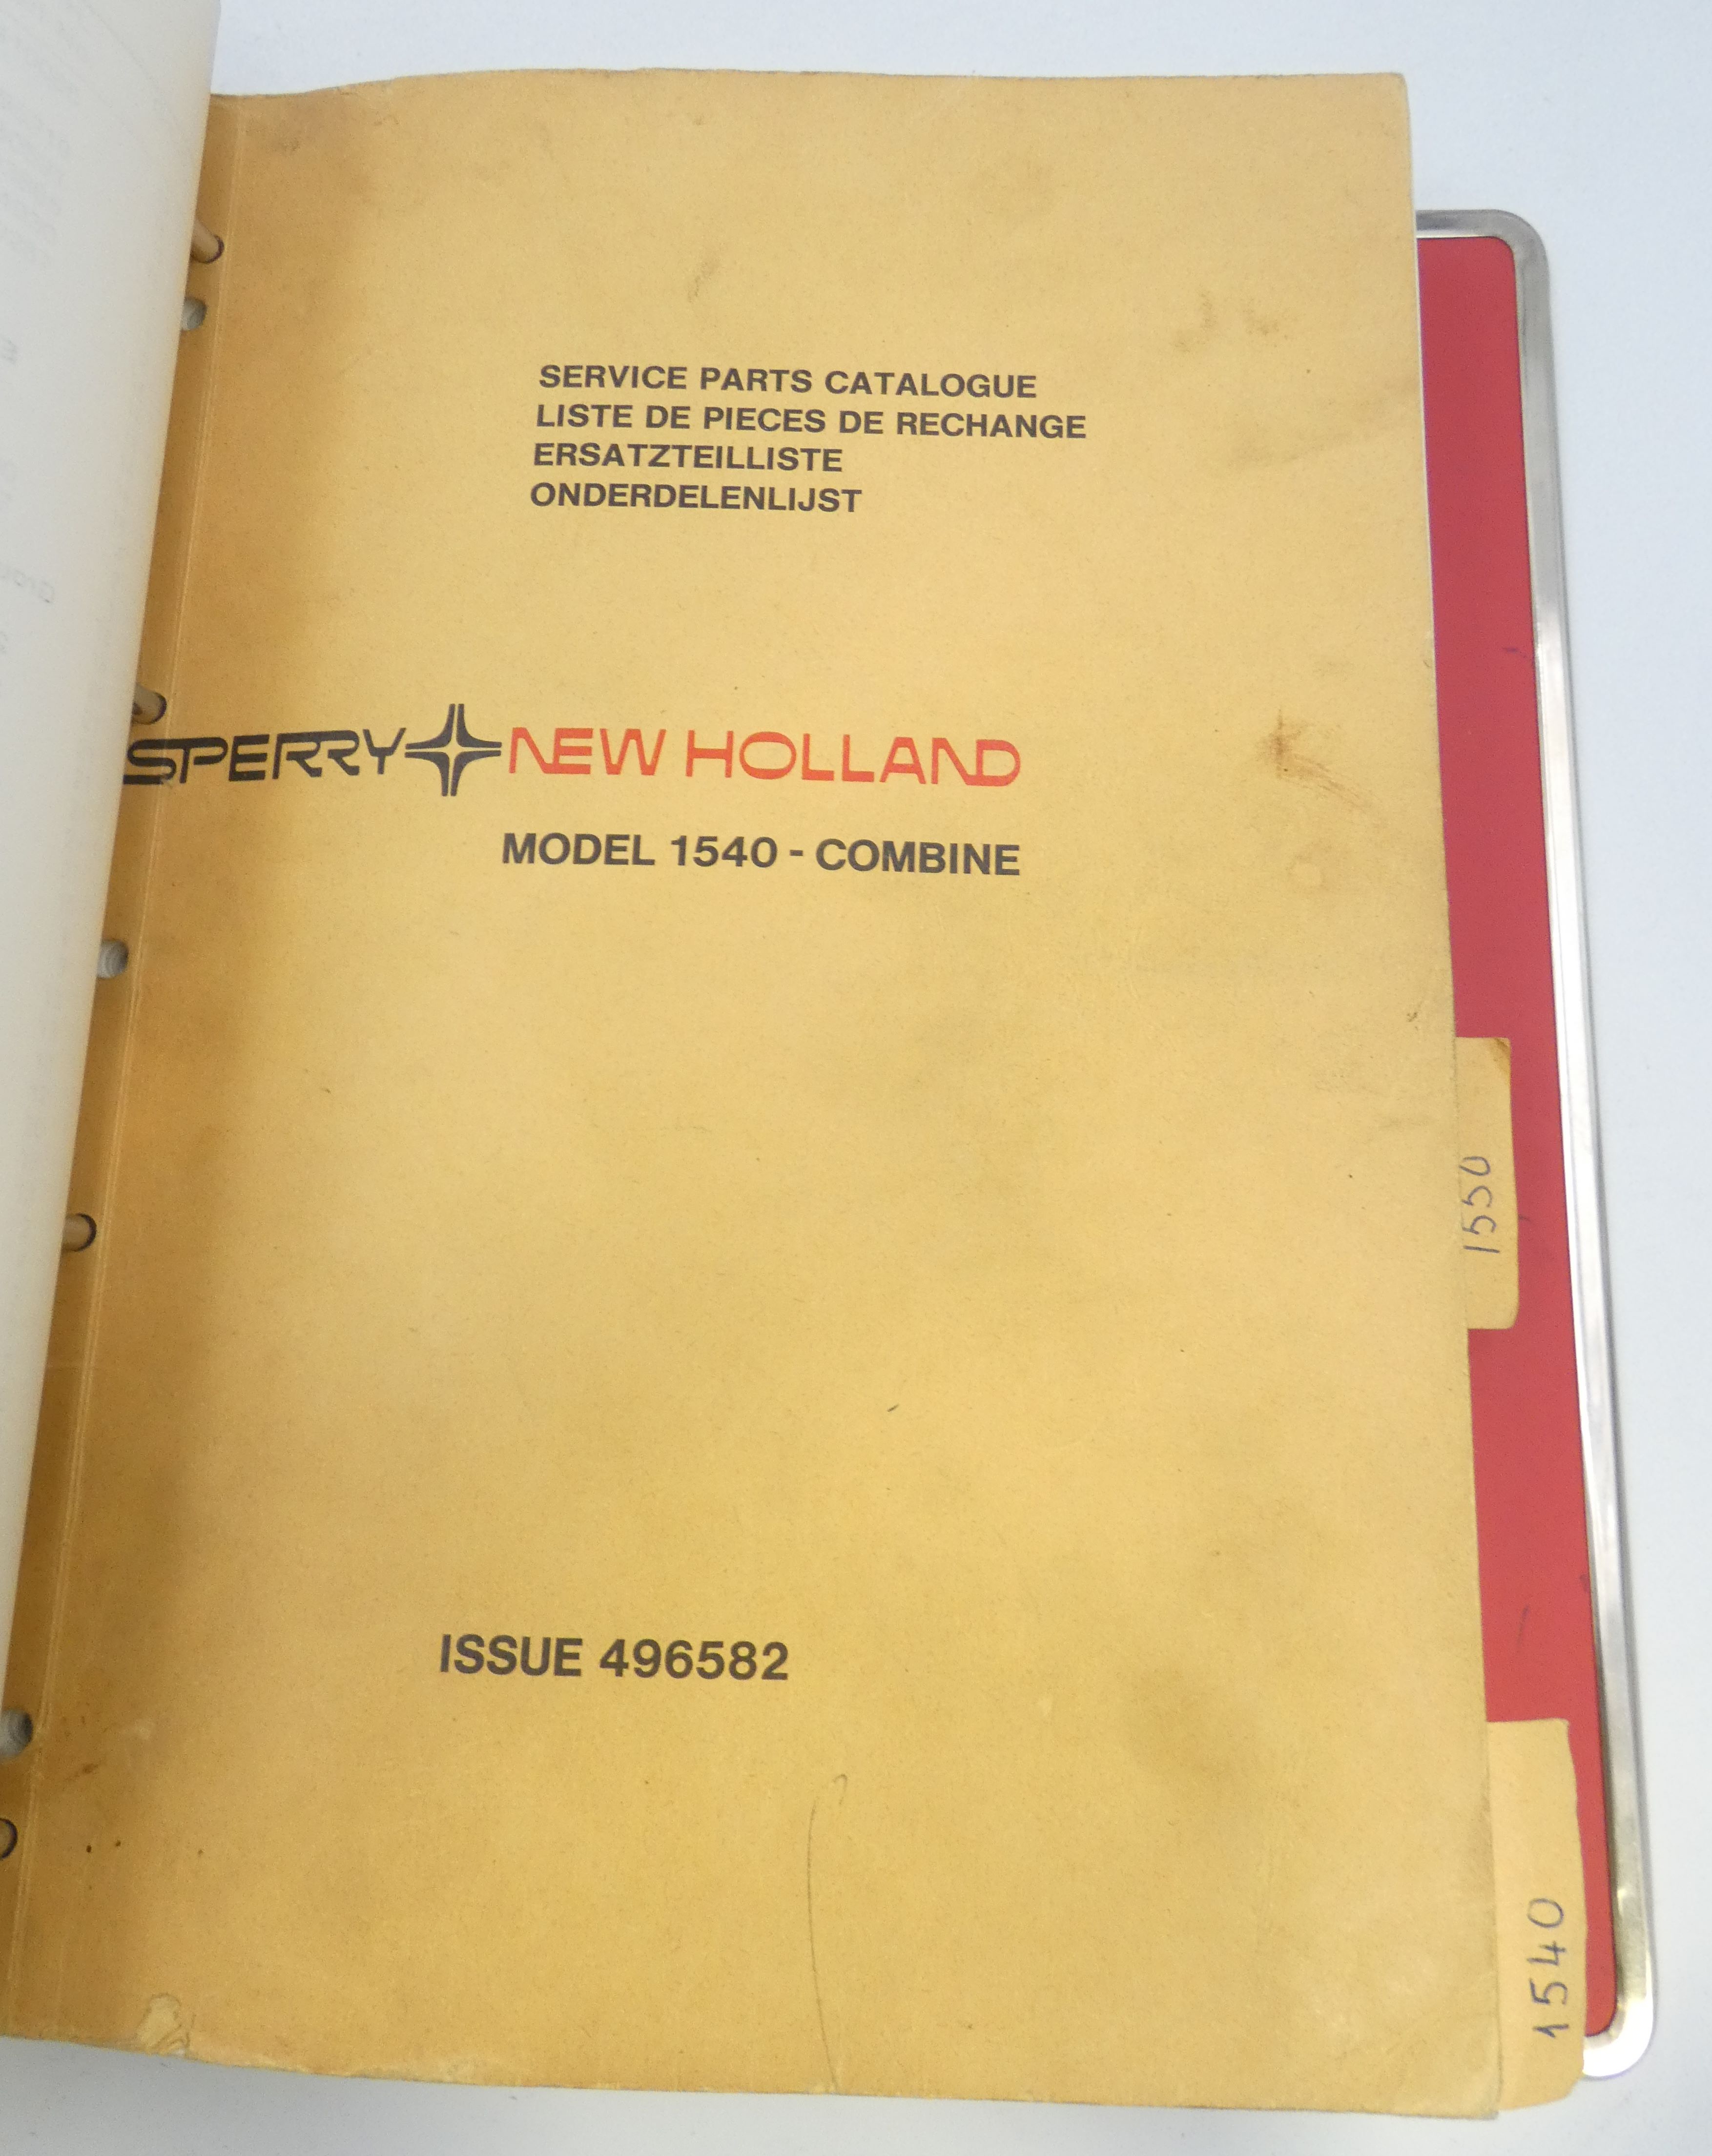 Ford 2700 Range Diesel engines, New Holland model Clayson 1450 and 1550 Super combine harvester service parts catalogue